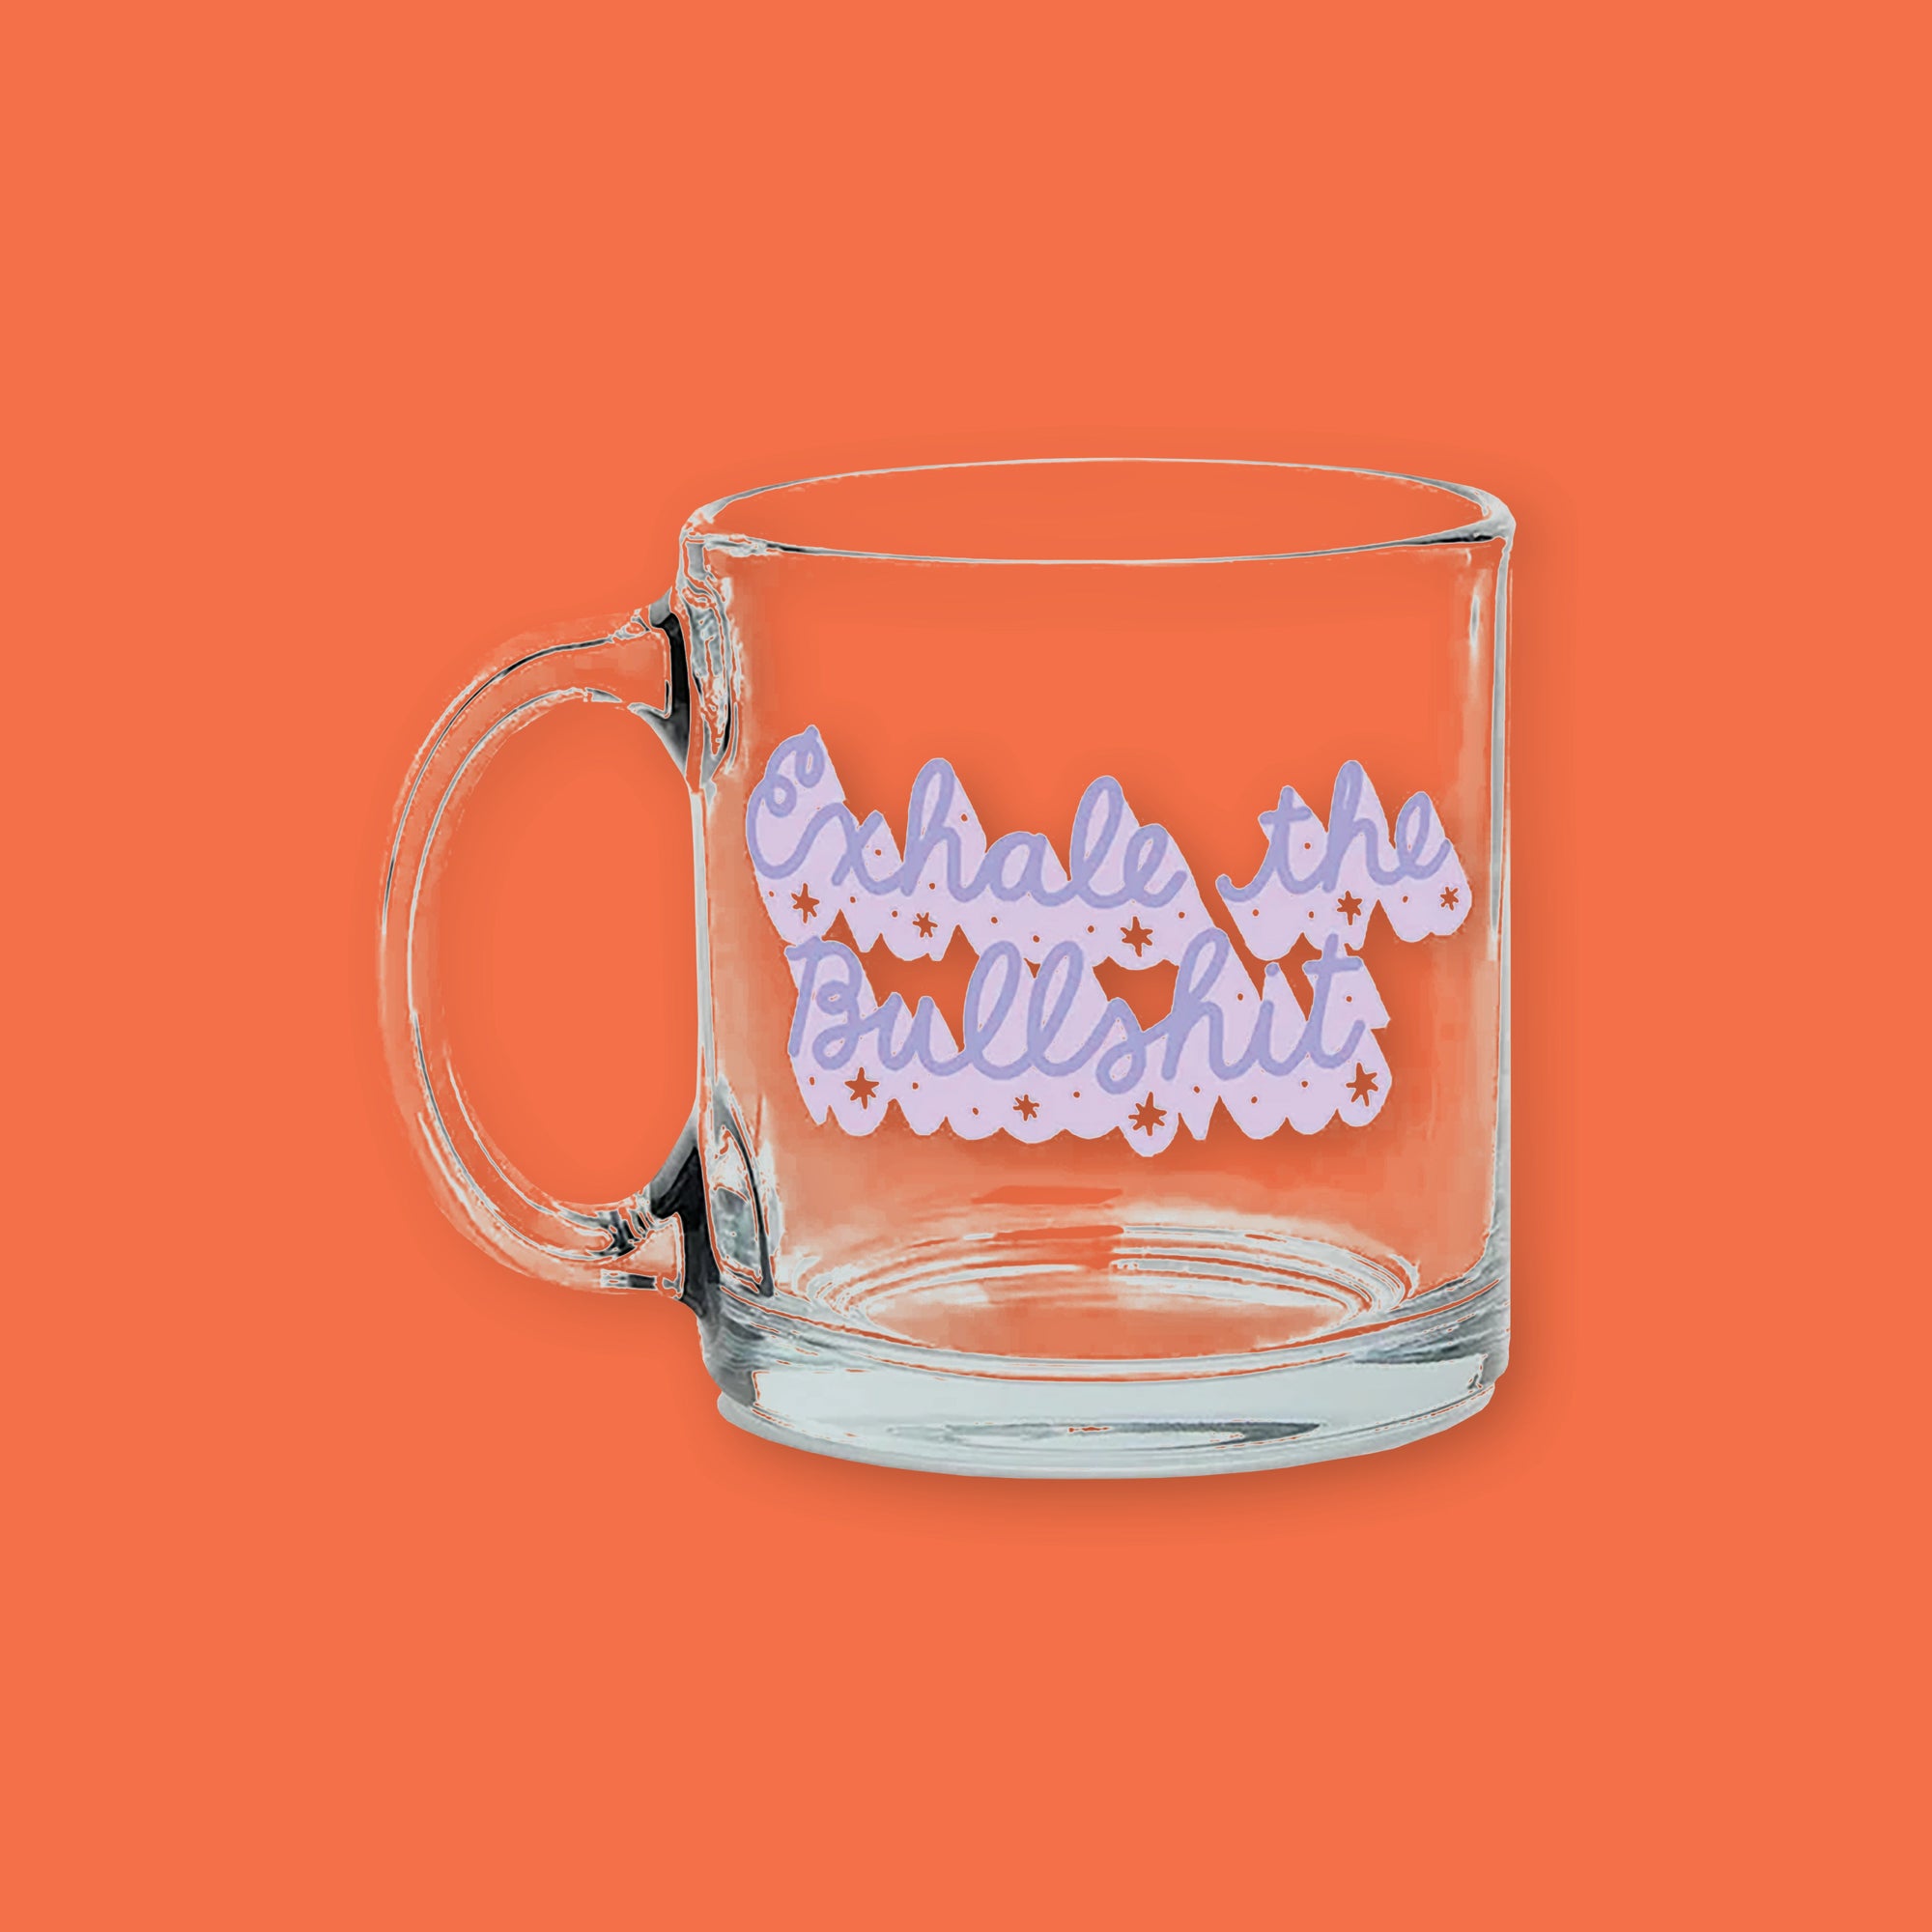 "On an orangey-red background sits a mug. This clear mug says ""Exhale the Bullshit"" in a dark lavender, handwritten script lettering. It has a light lavender dropshadow and stars and dots around the wording.  "